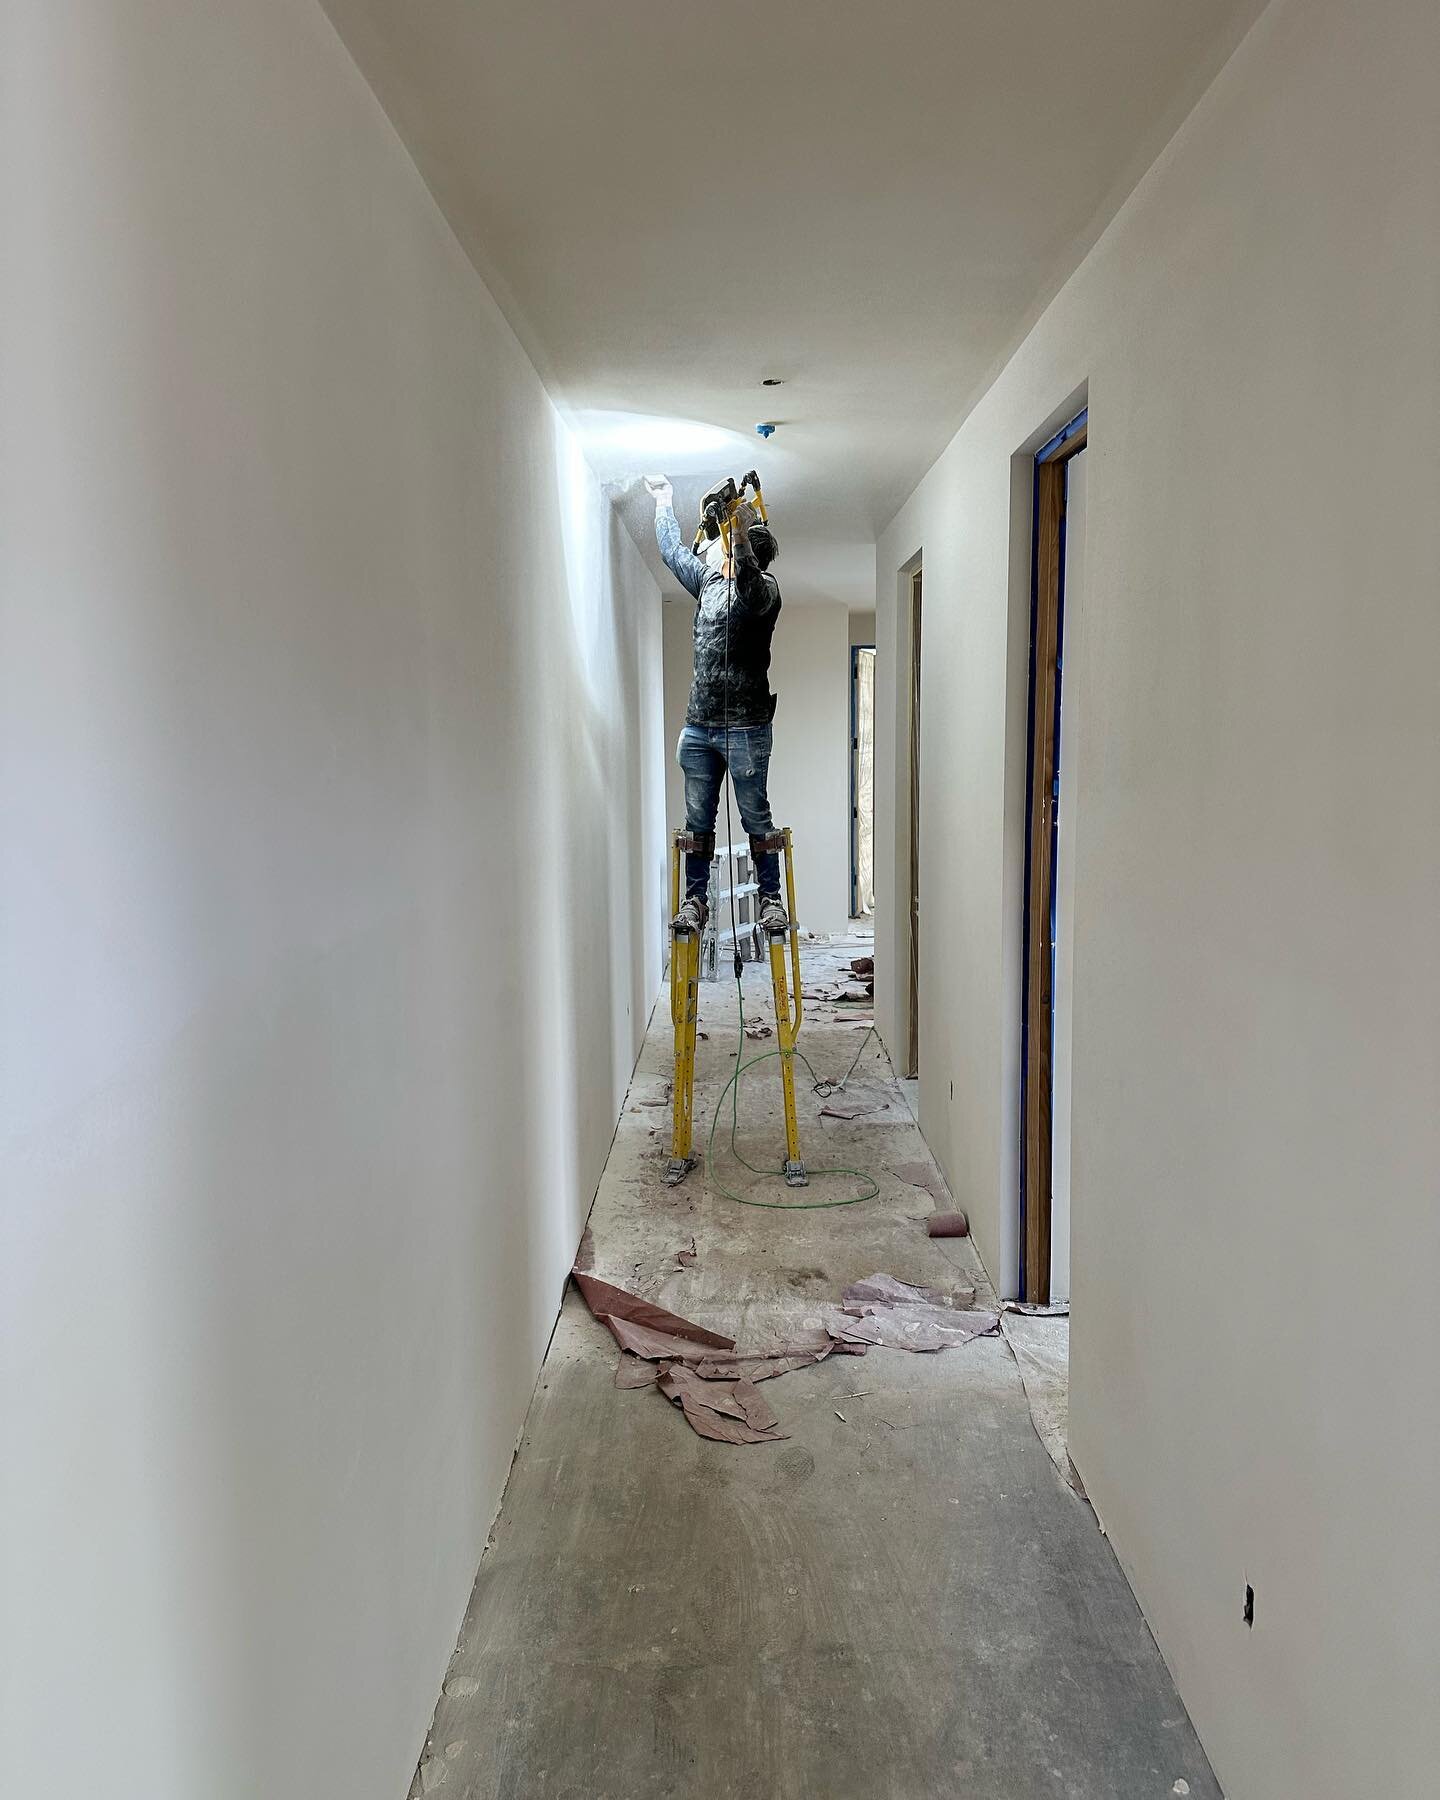 Before you go underestimating drywall work, let us take a minute here to acknowledge some of the biggest hustlers on the jobsites.